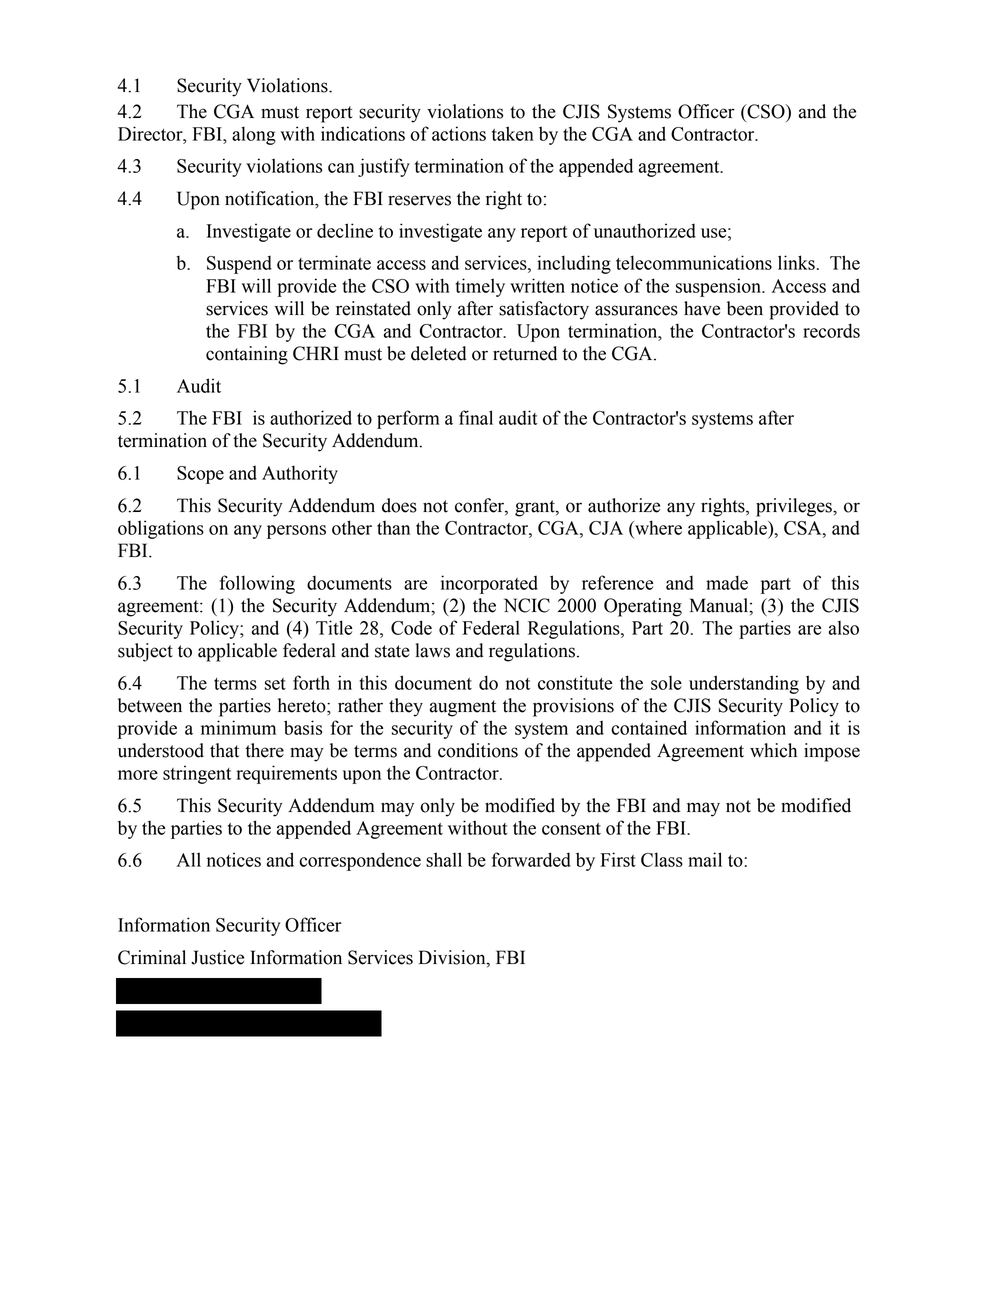 Page 75 from State of Michigan 2020 Kaseware contract